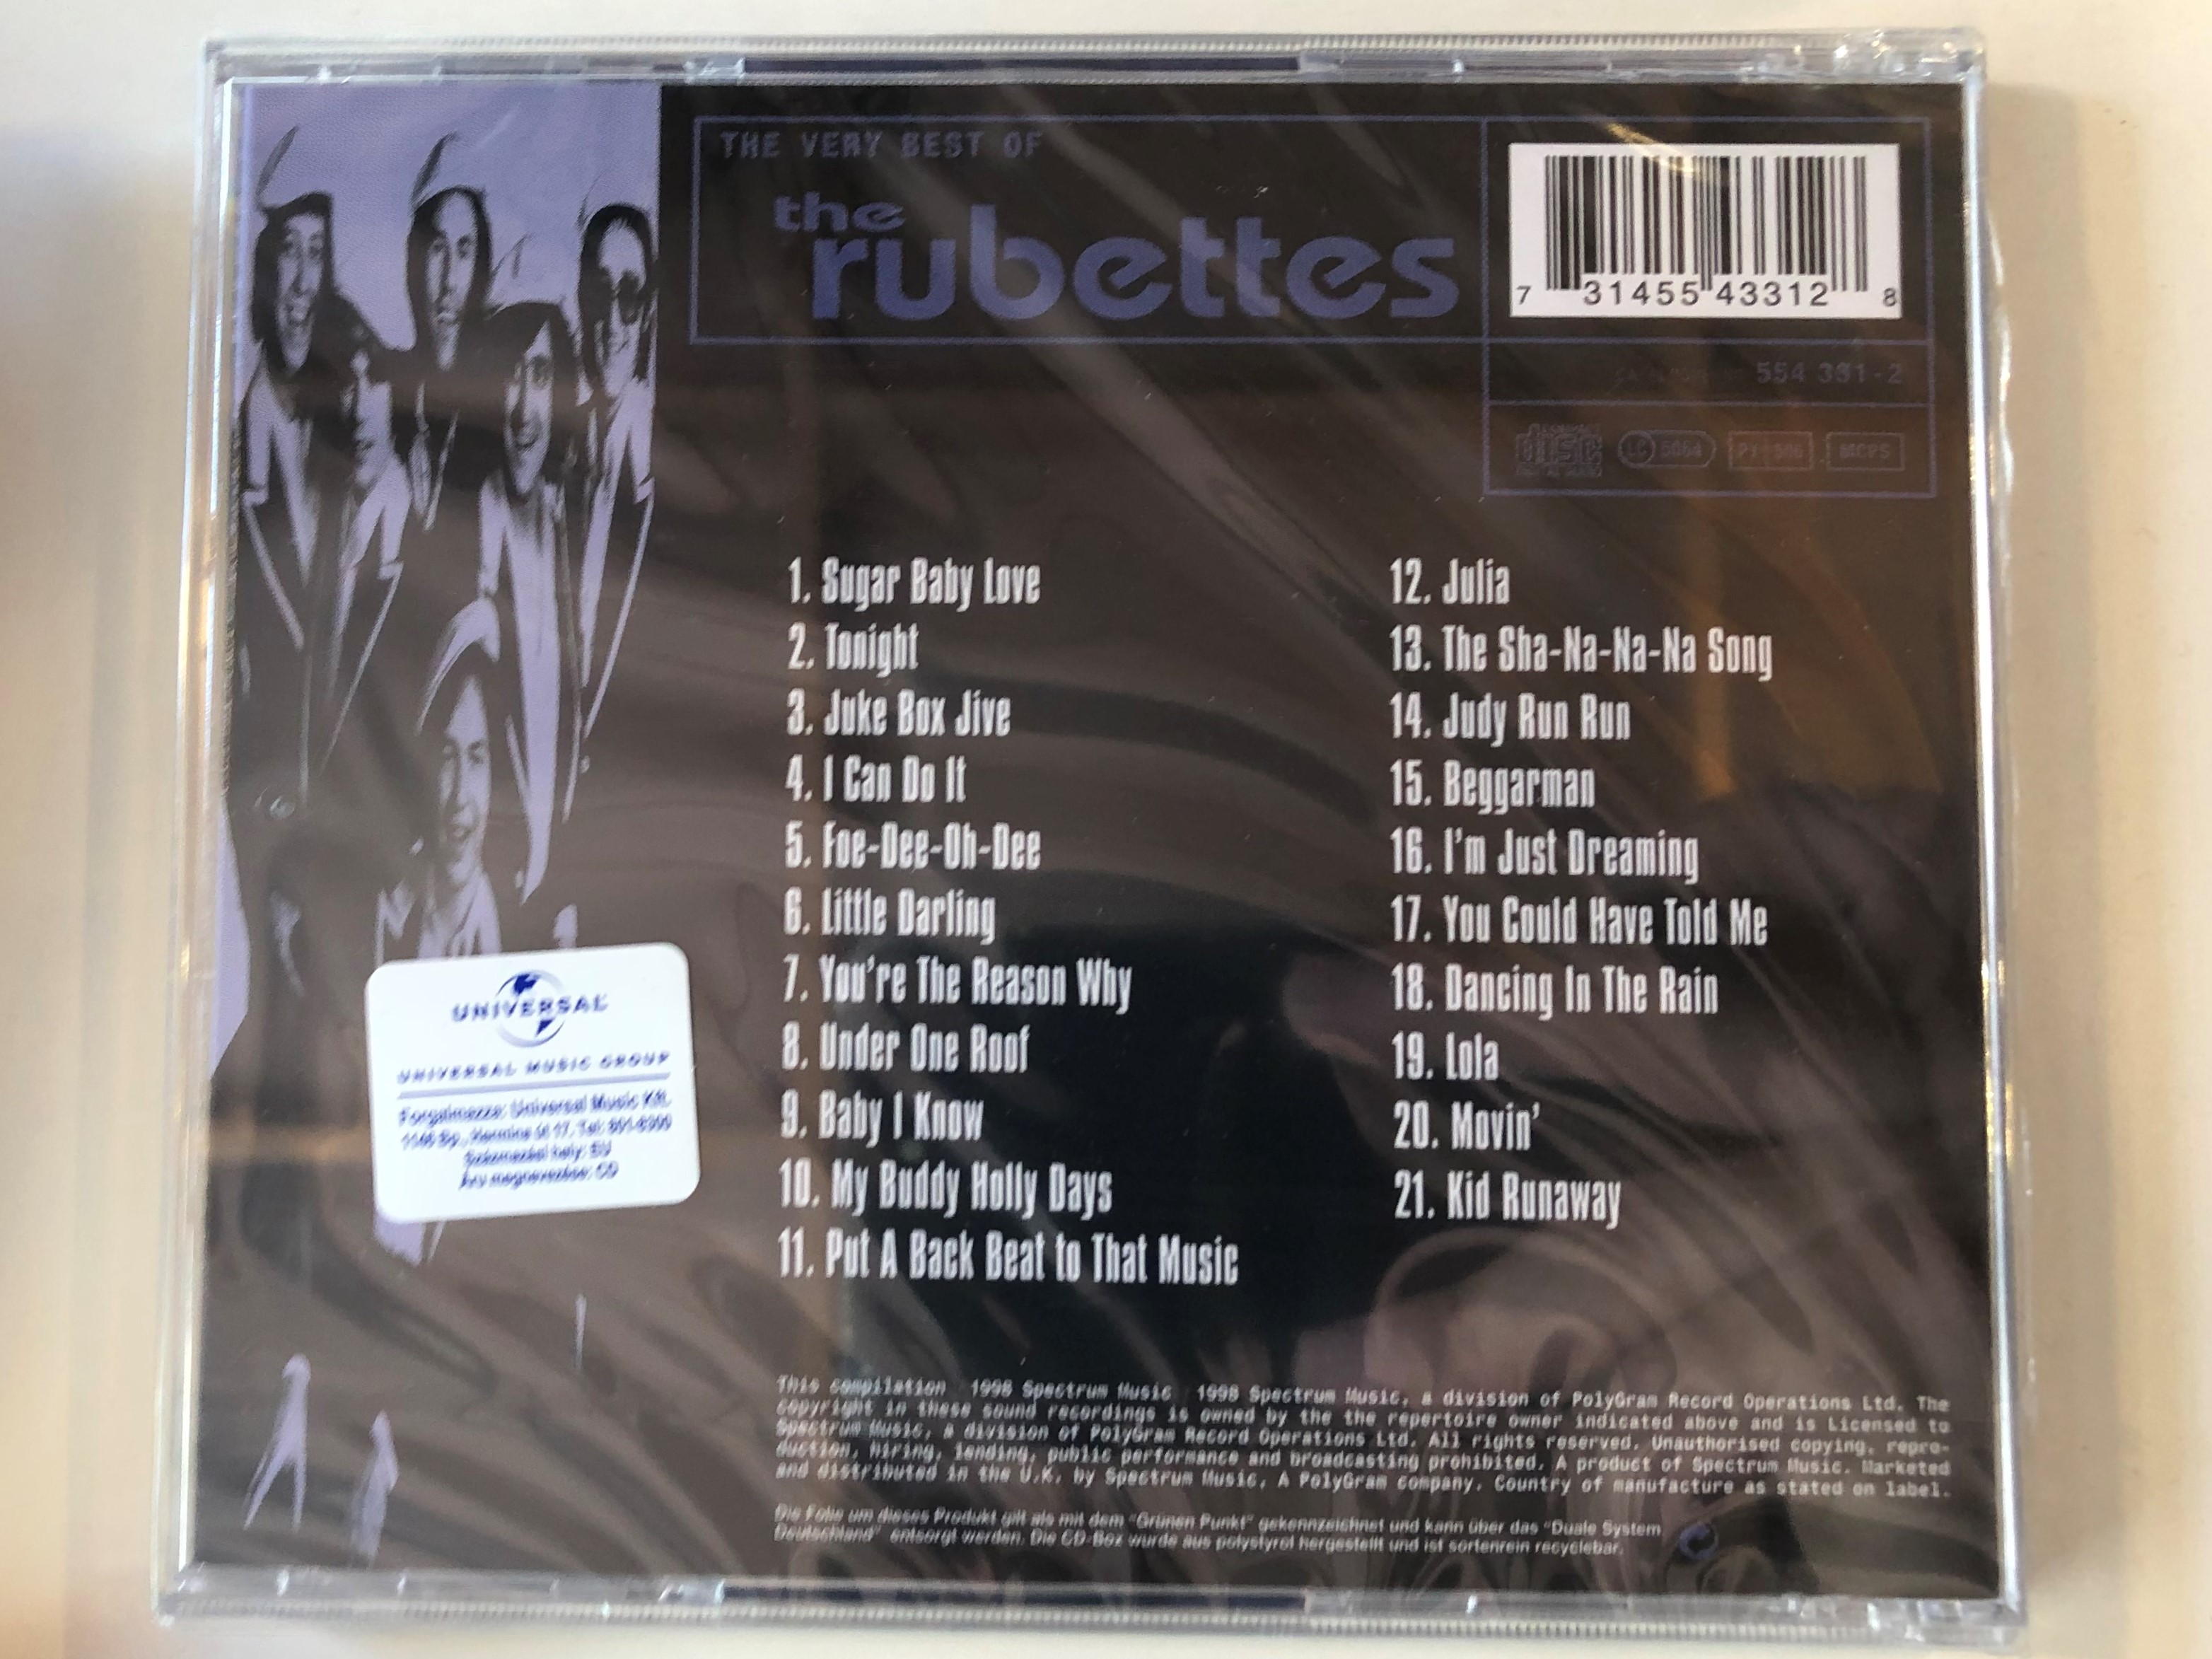 the-very-best-of-the-rubettes-including-sugar-baby-love-juke-box-jive-i-can-do-it-tonight-spectrum-music-audio-cd-1998-554-331-2-2-.jpg